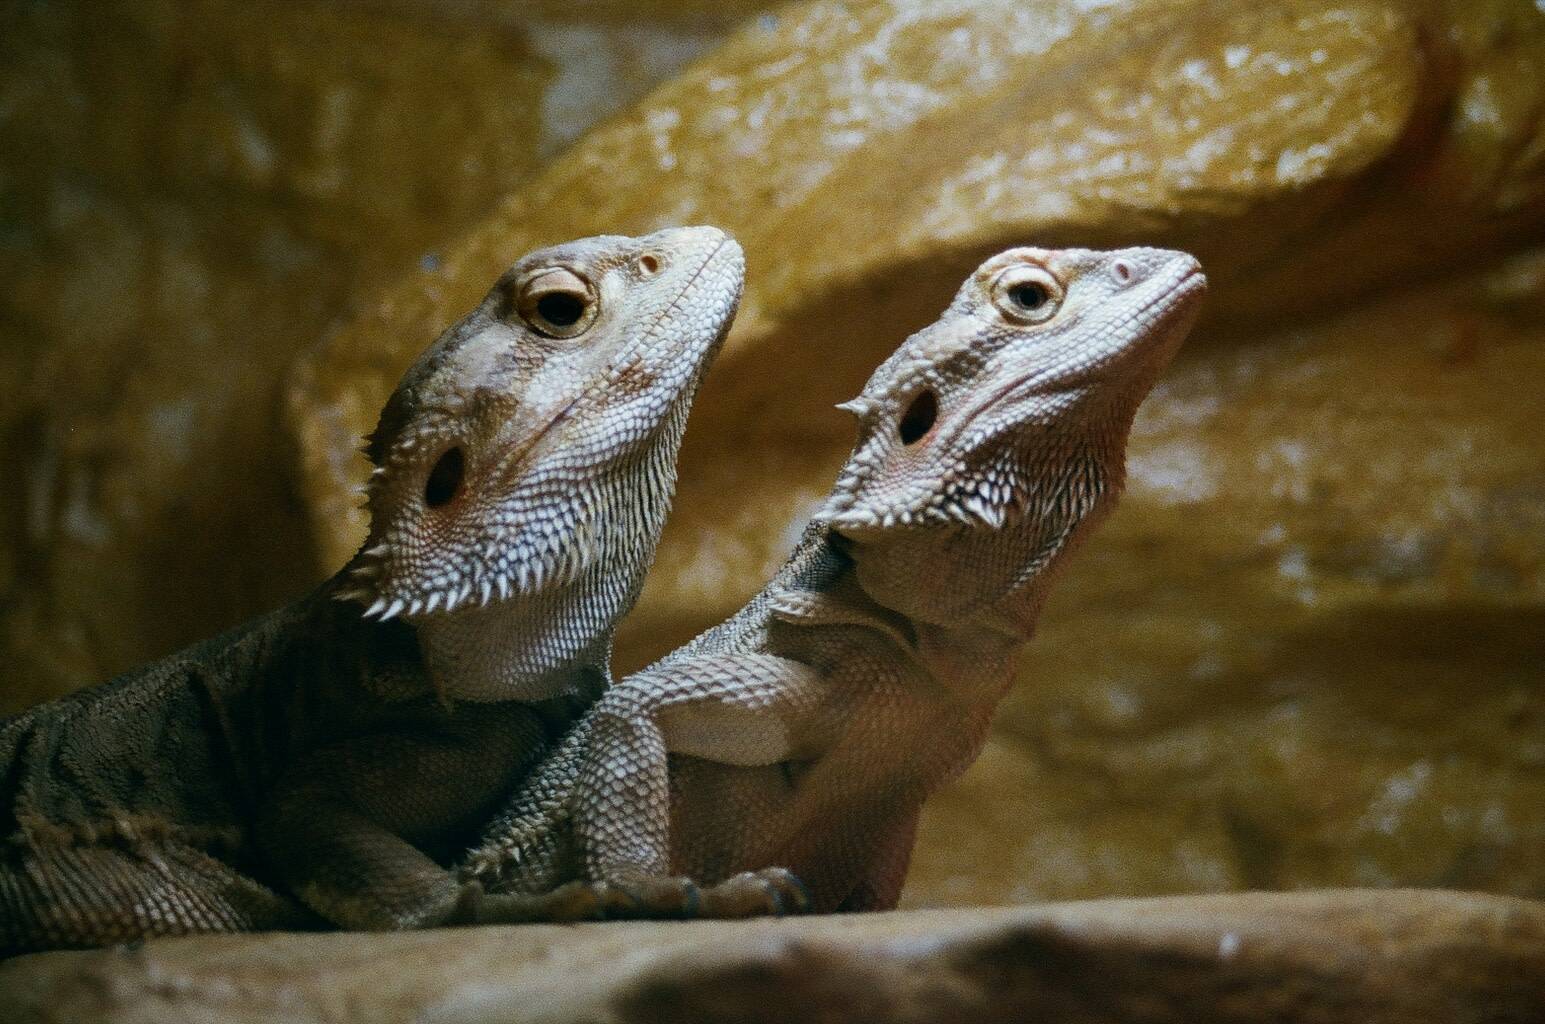 two bearded dragons sitting side by side and relaxing